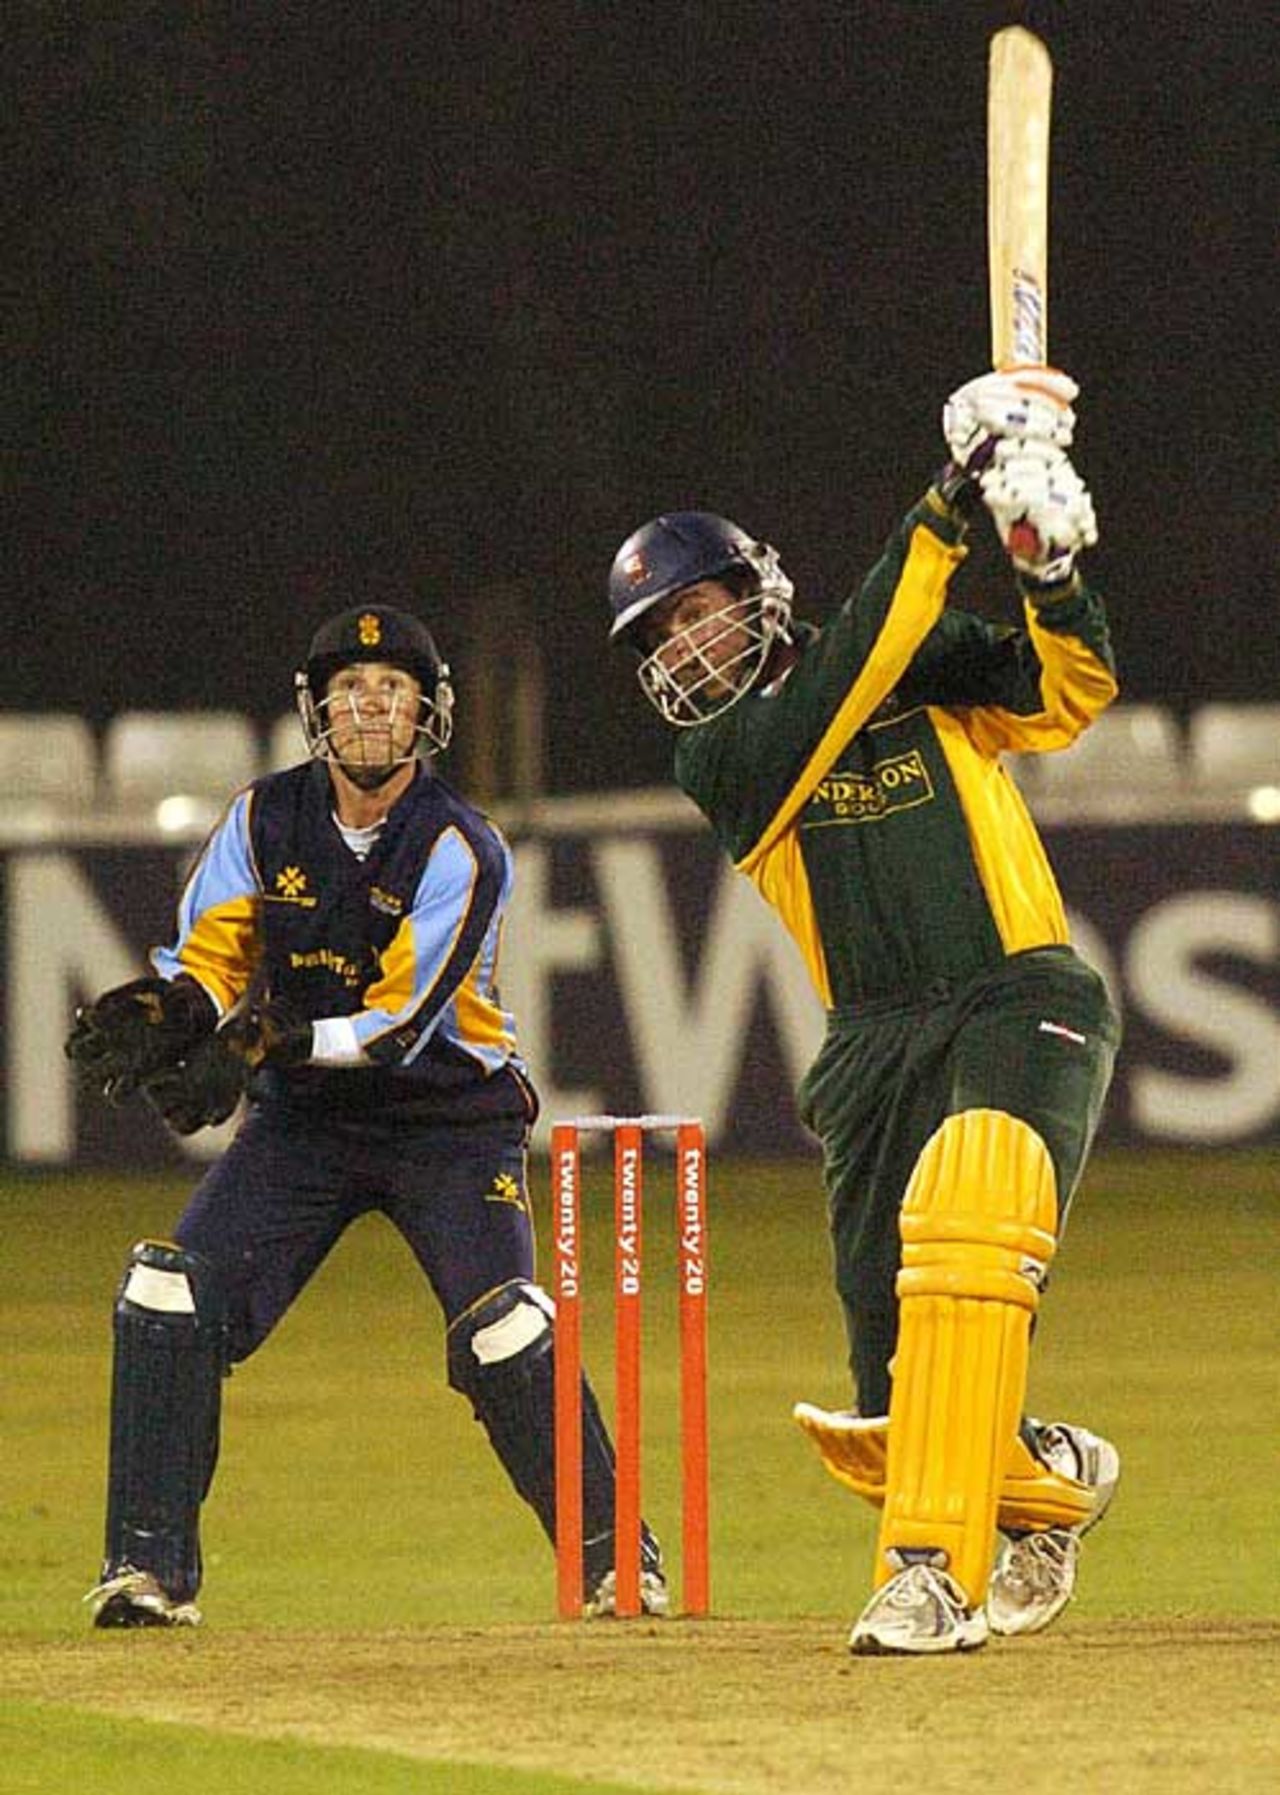 Ronnie Irani launches a boundary, Essex v Derbyshure, Twenty20 Floodlit Cup, September 13, 2006